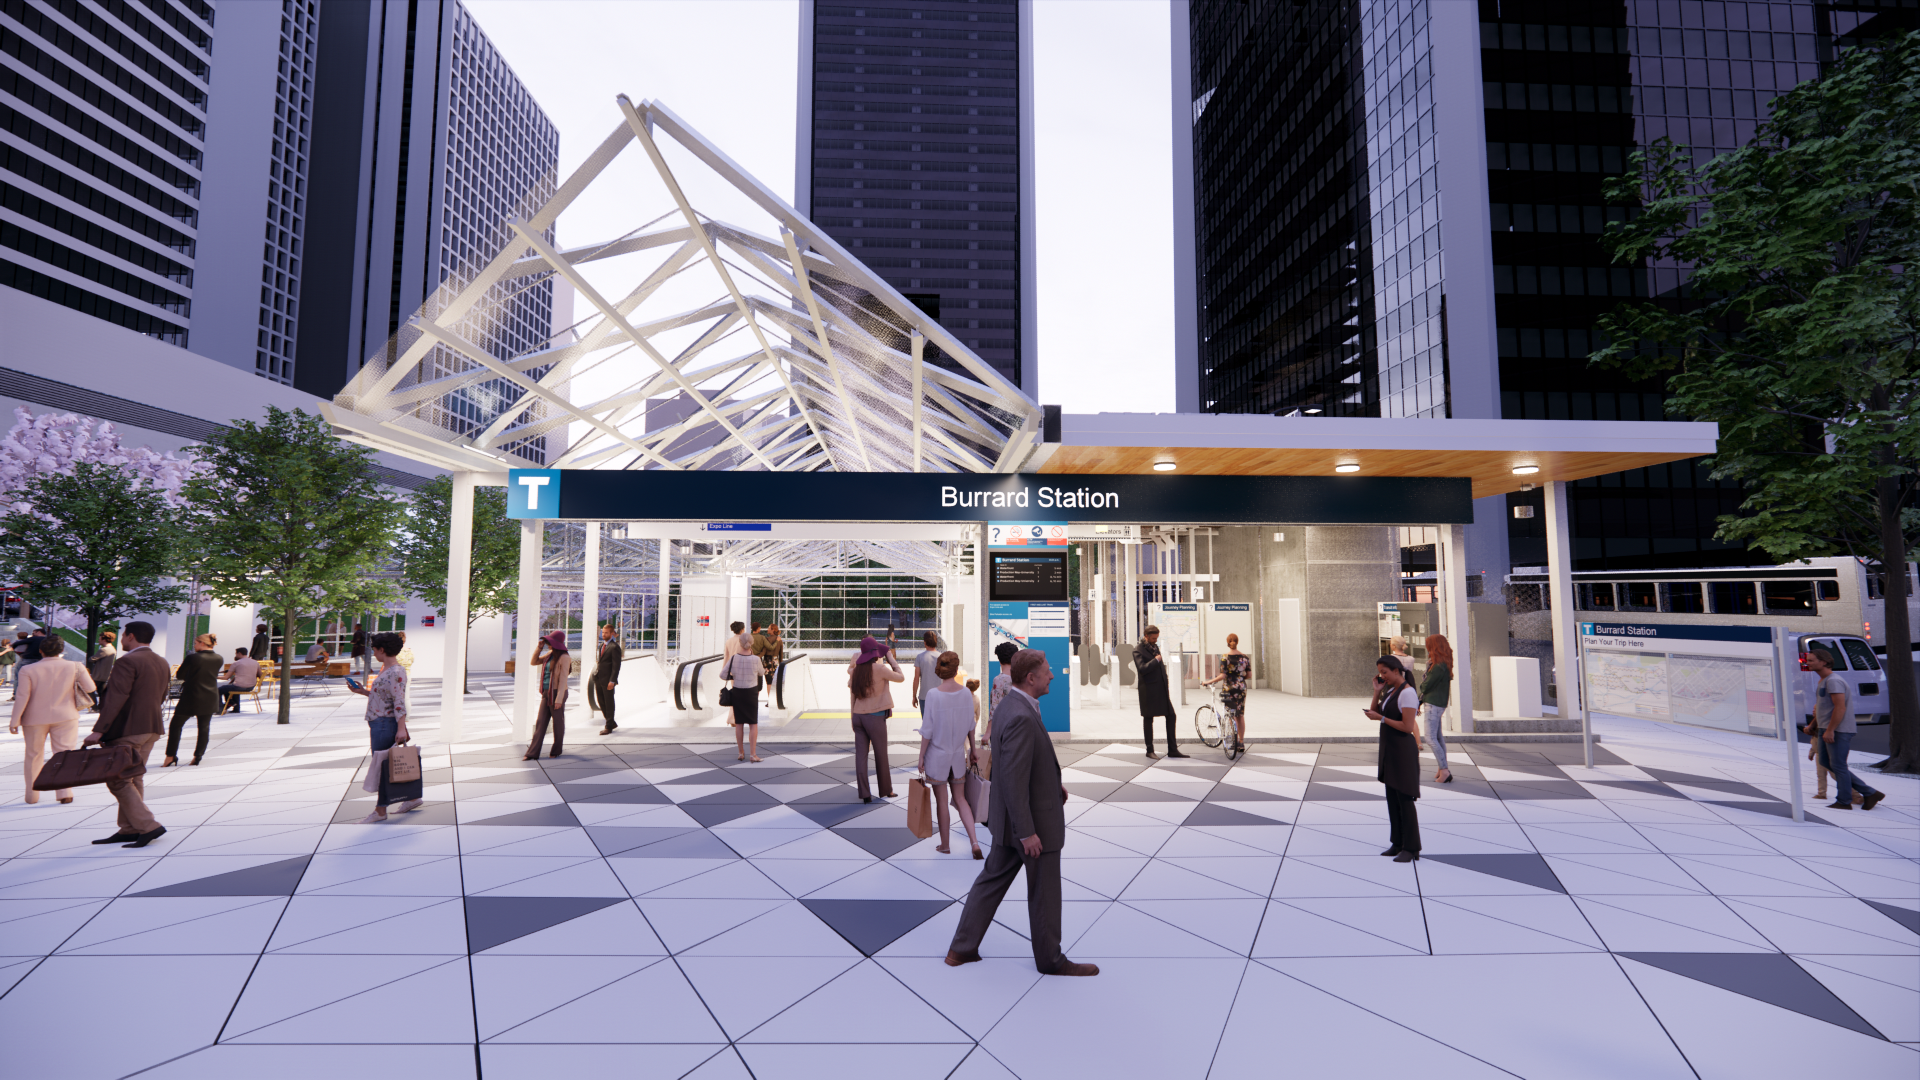 Rendering of the upgraded Burrard Station entrance plaza